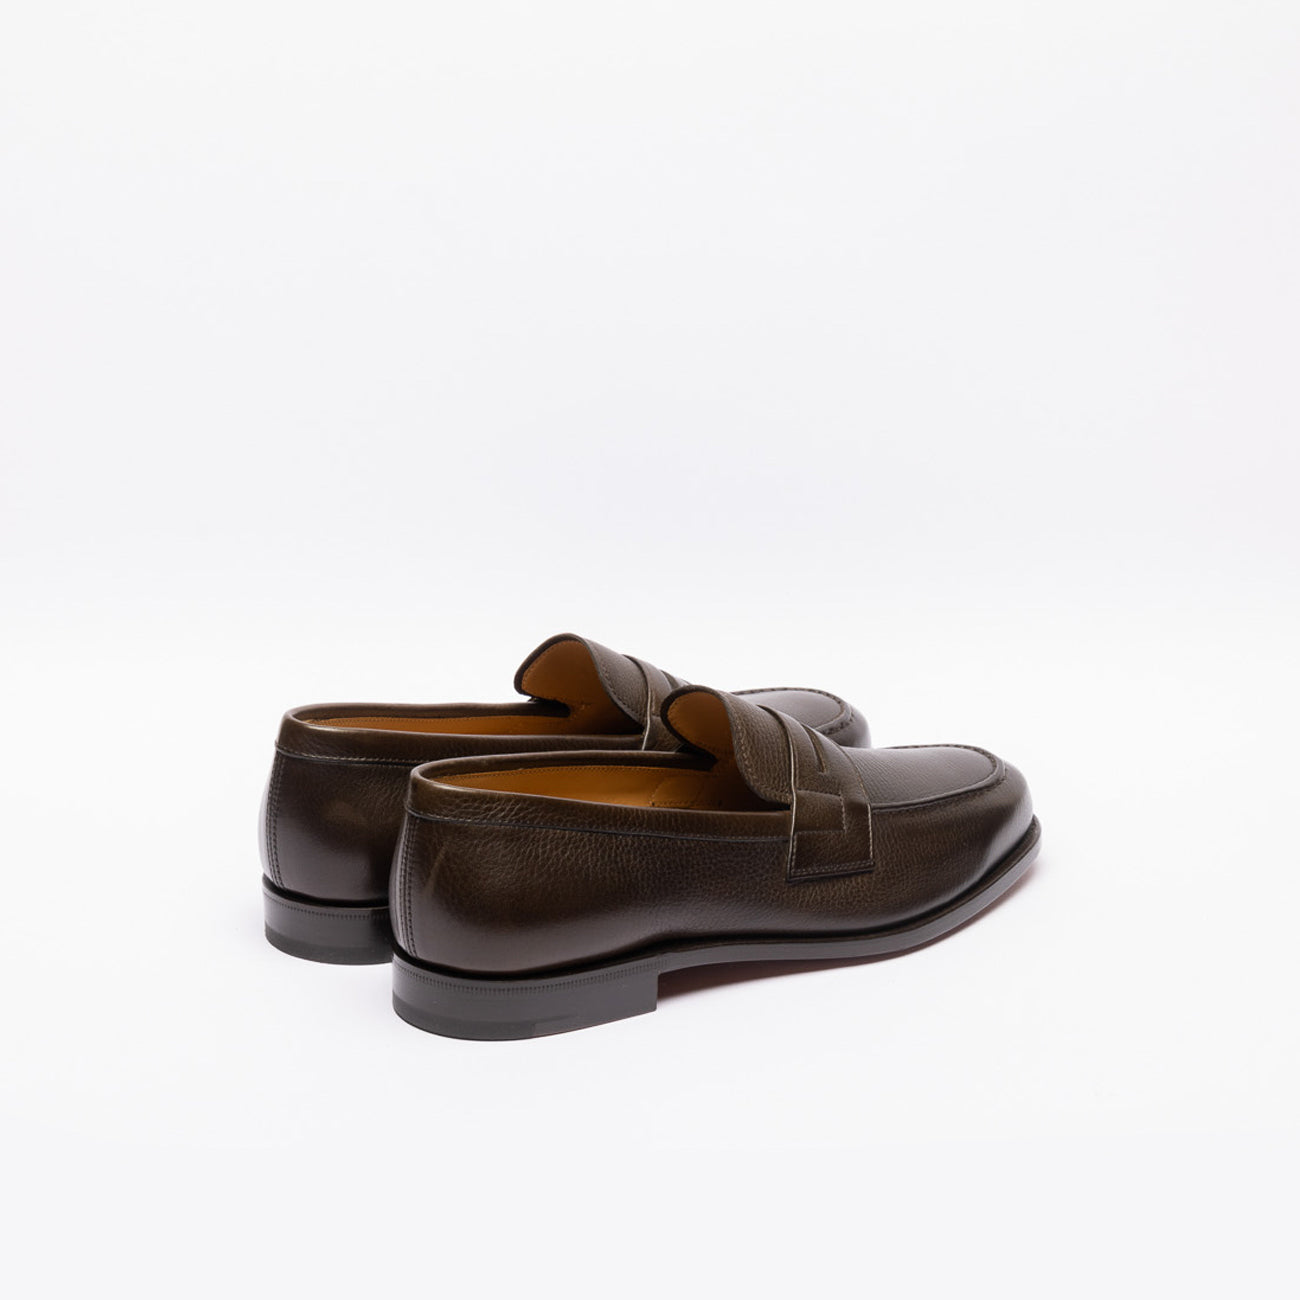 Church's Heswall penny loafers in brown hammered leather (Ebony soft grain)